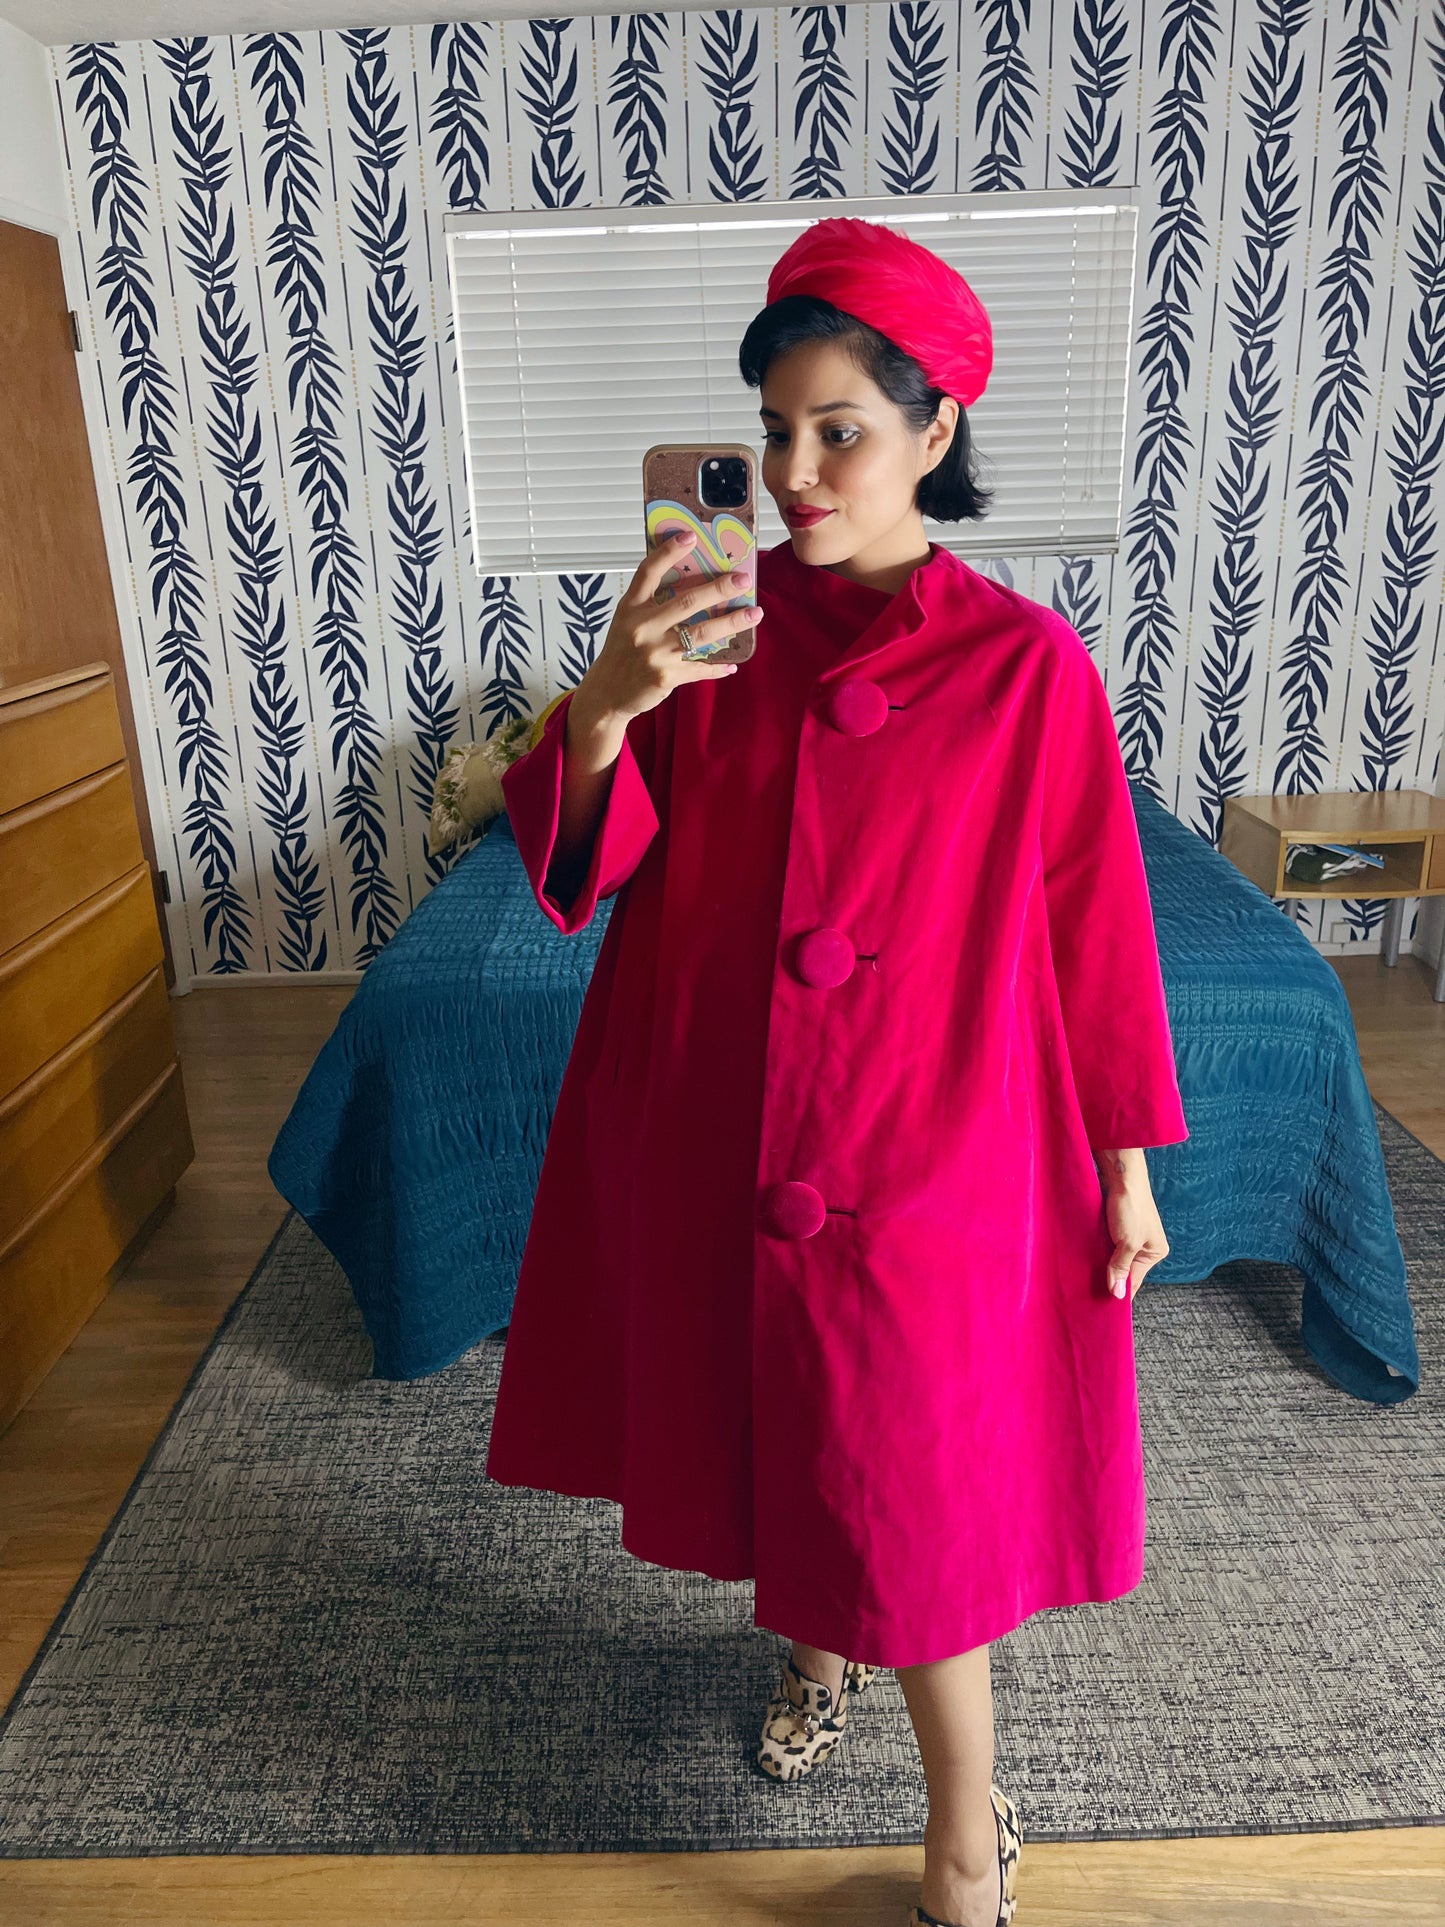 Vintage 50s/60s Hot Pink Velvet Marguerite Rubel San Francisco Swing Coat fits sizes XS-L. Made by Marguerite Rubel San Francisco